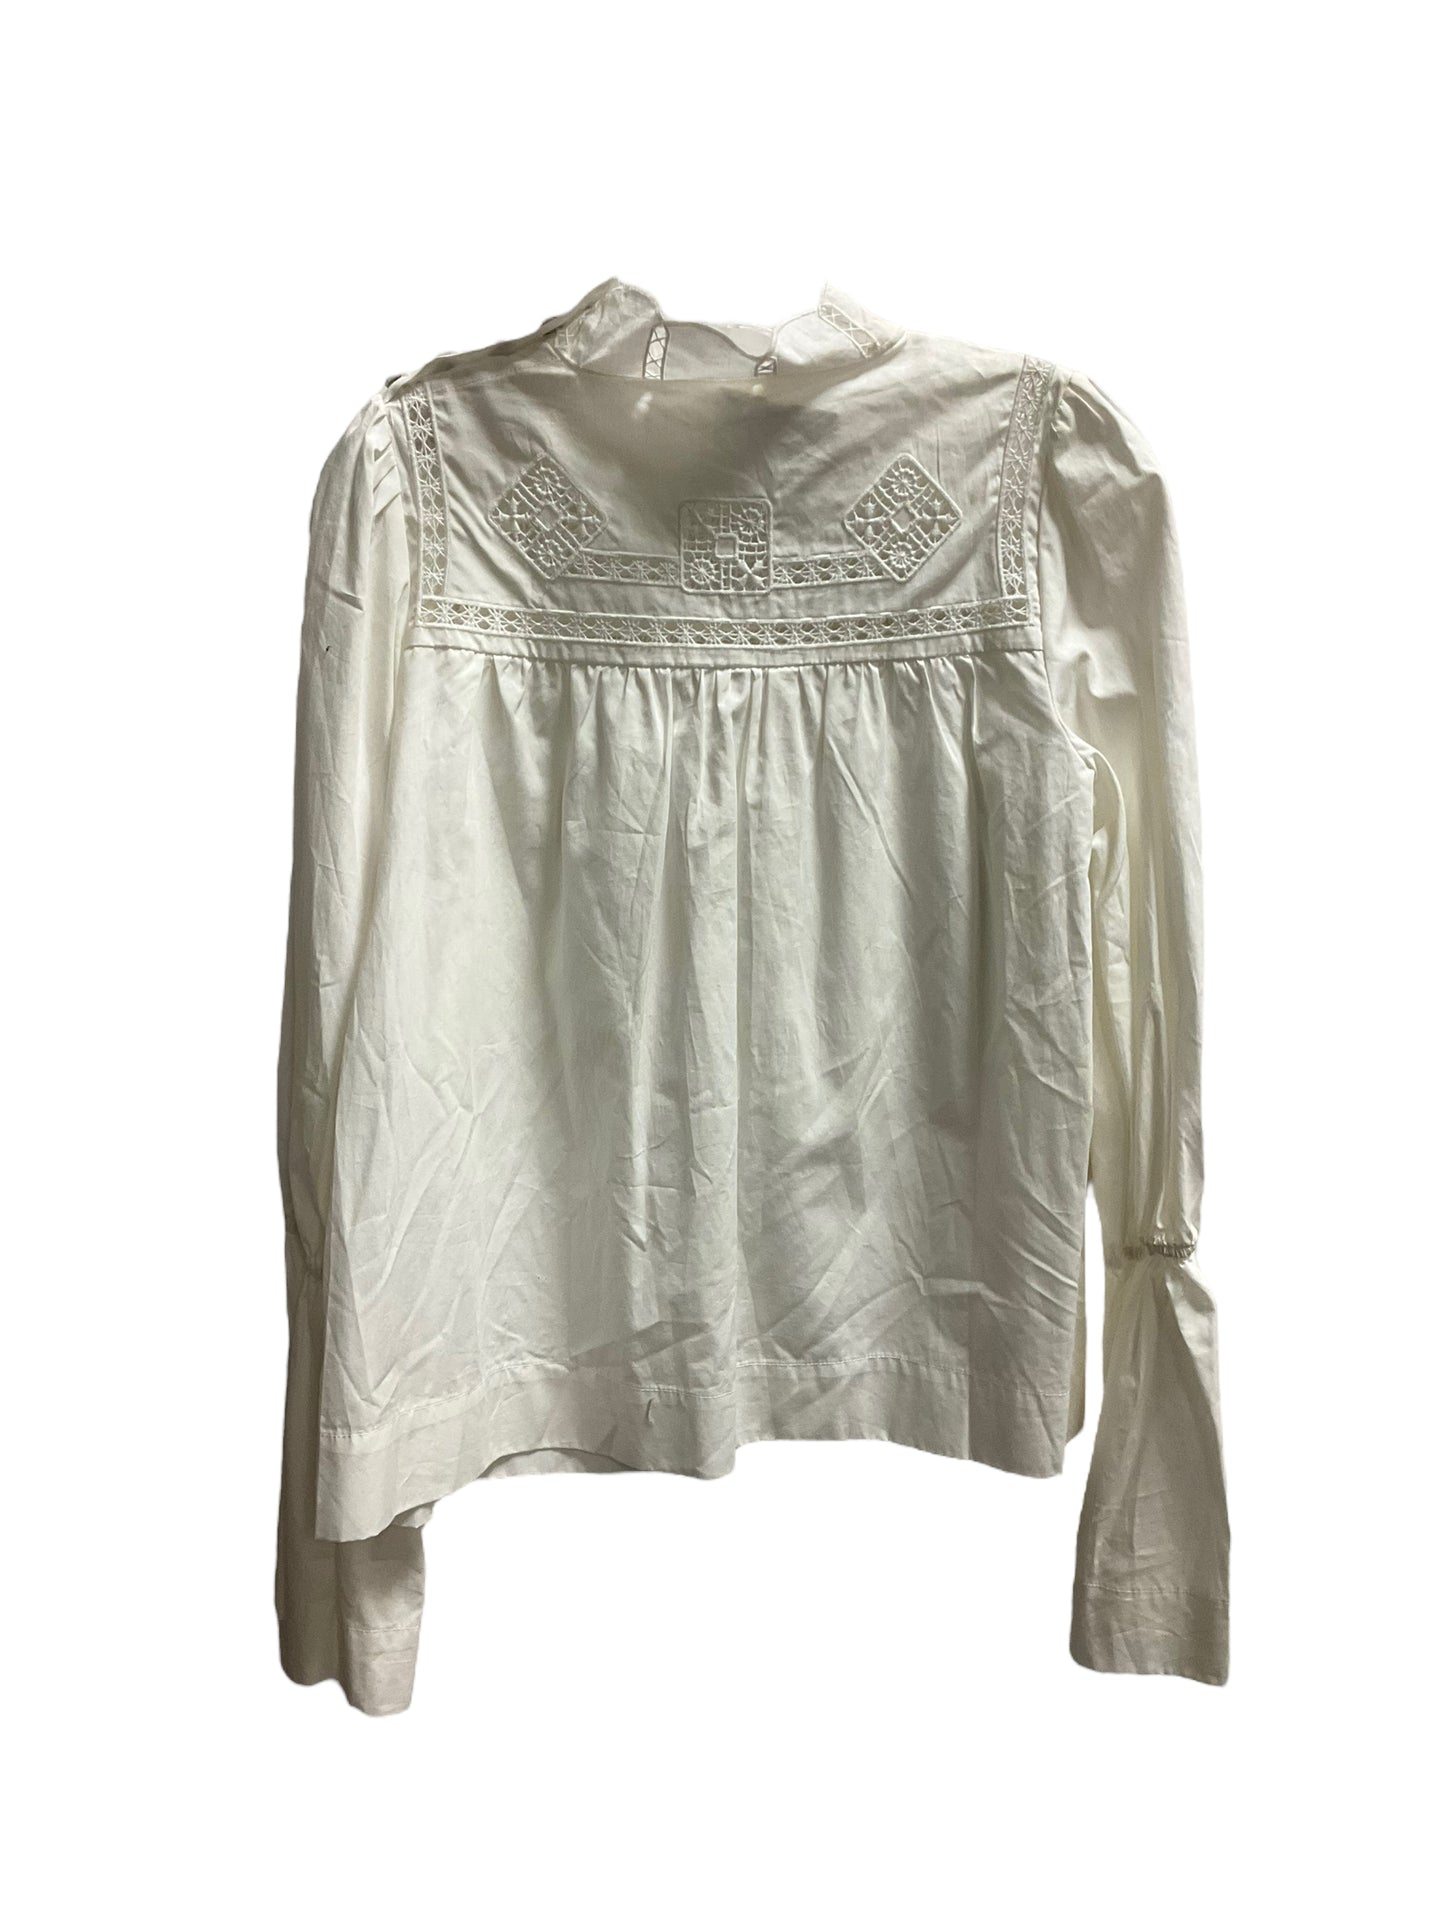 Top Long Sleeve By Free People  Size: Petite   S